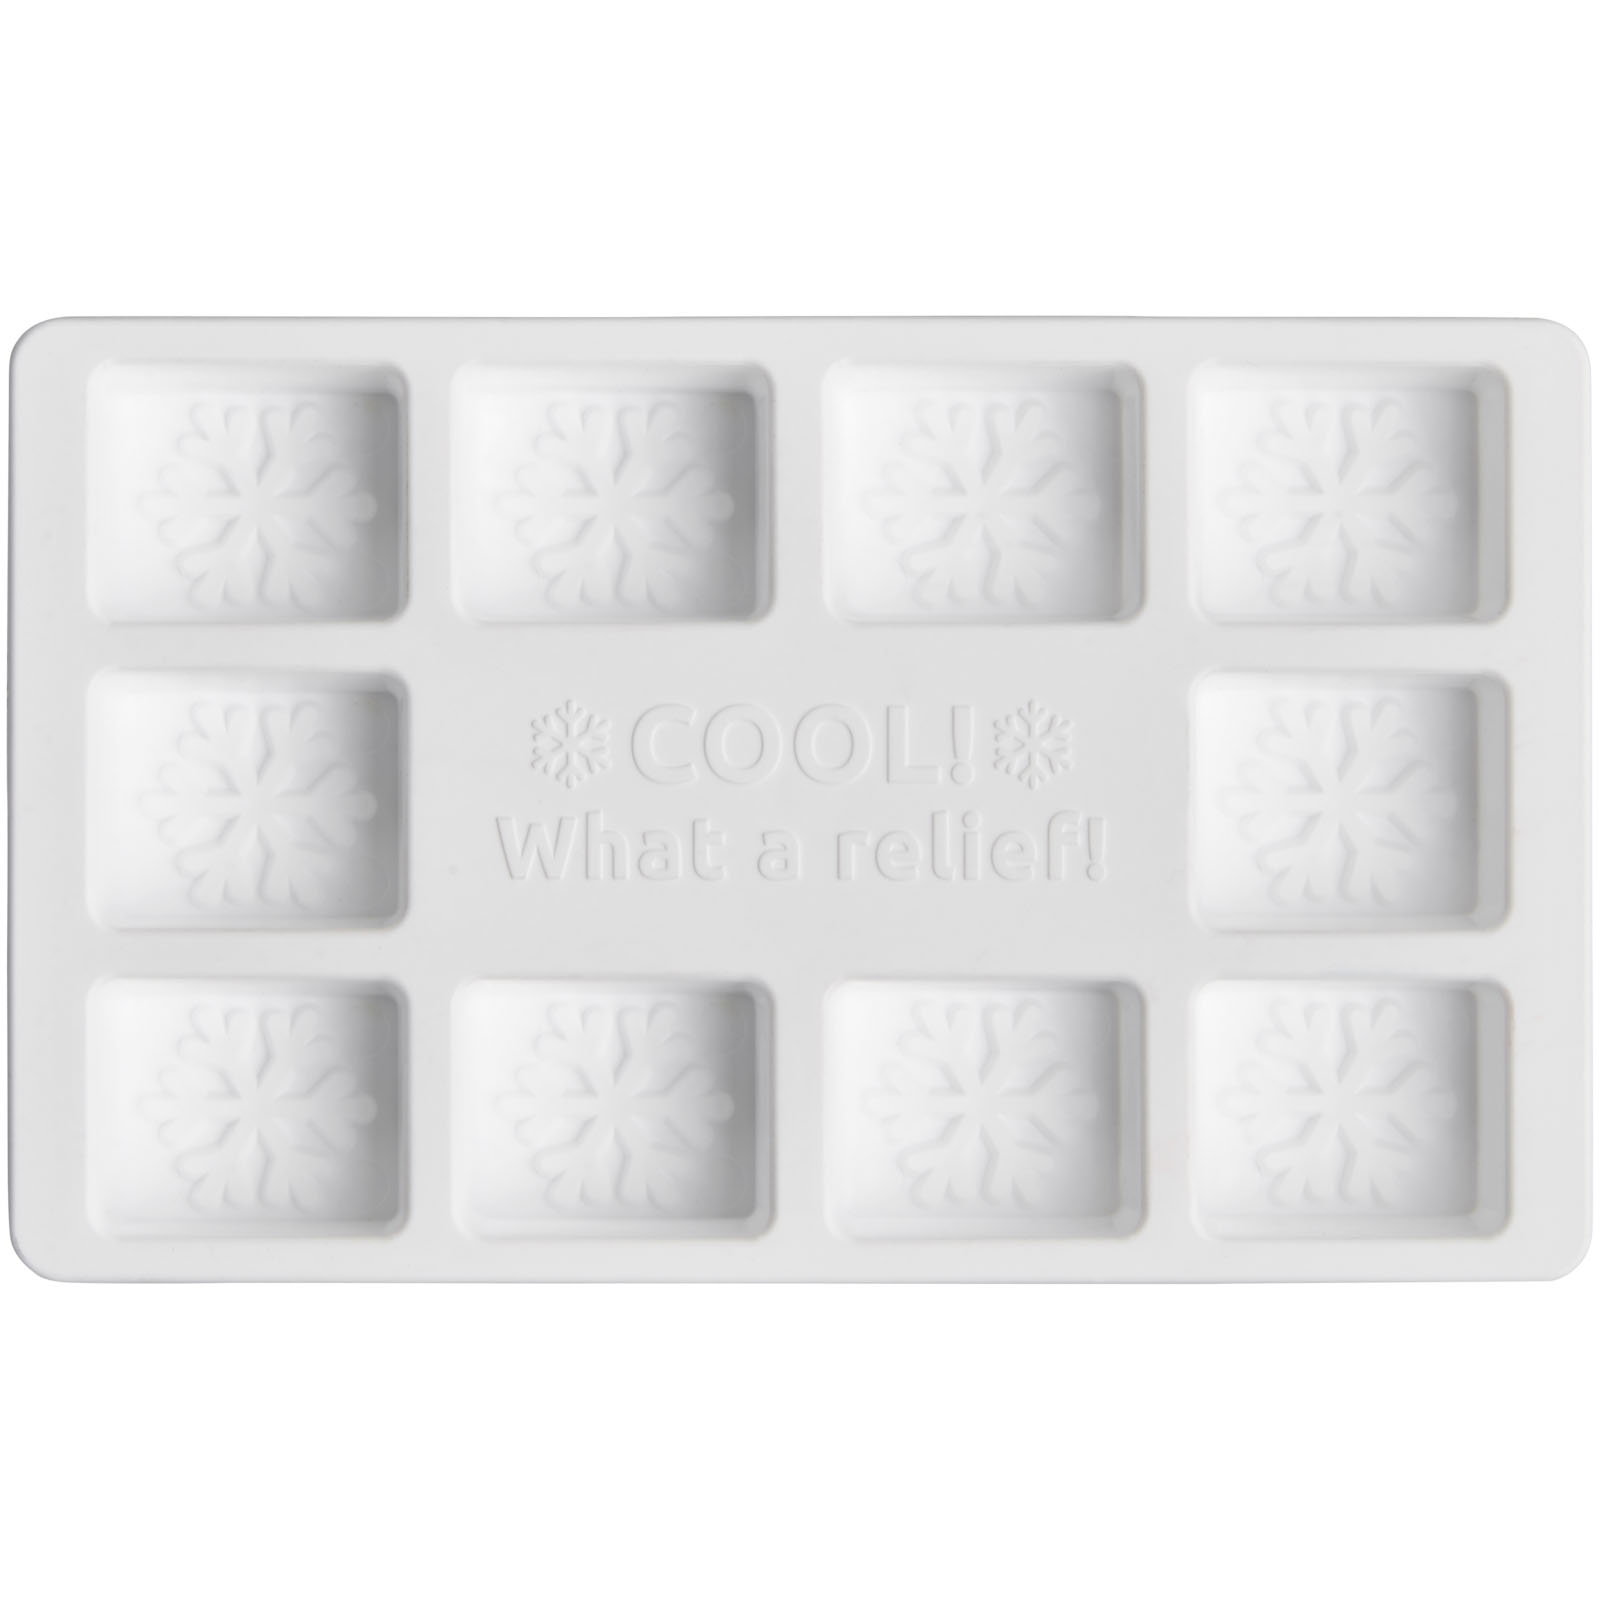 Advertising Kitchenware - Chill customisable ice cube tray - 1